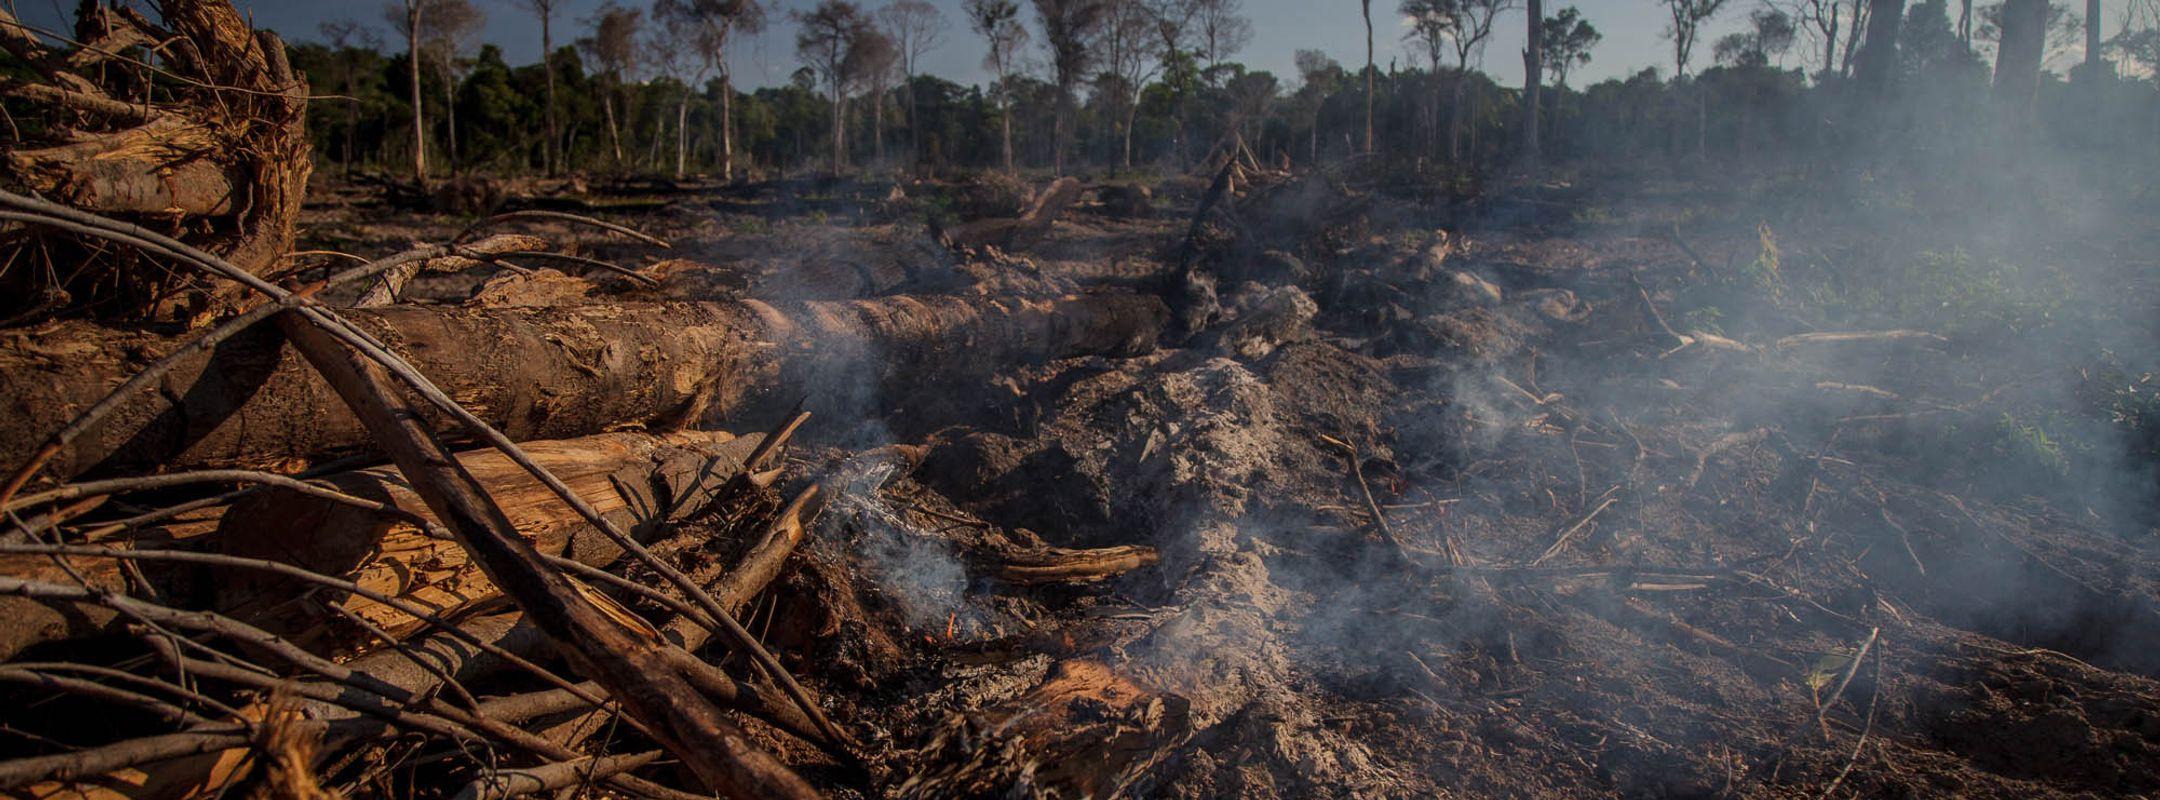 Burning Forest in the Amazon, Marcelândia, MT